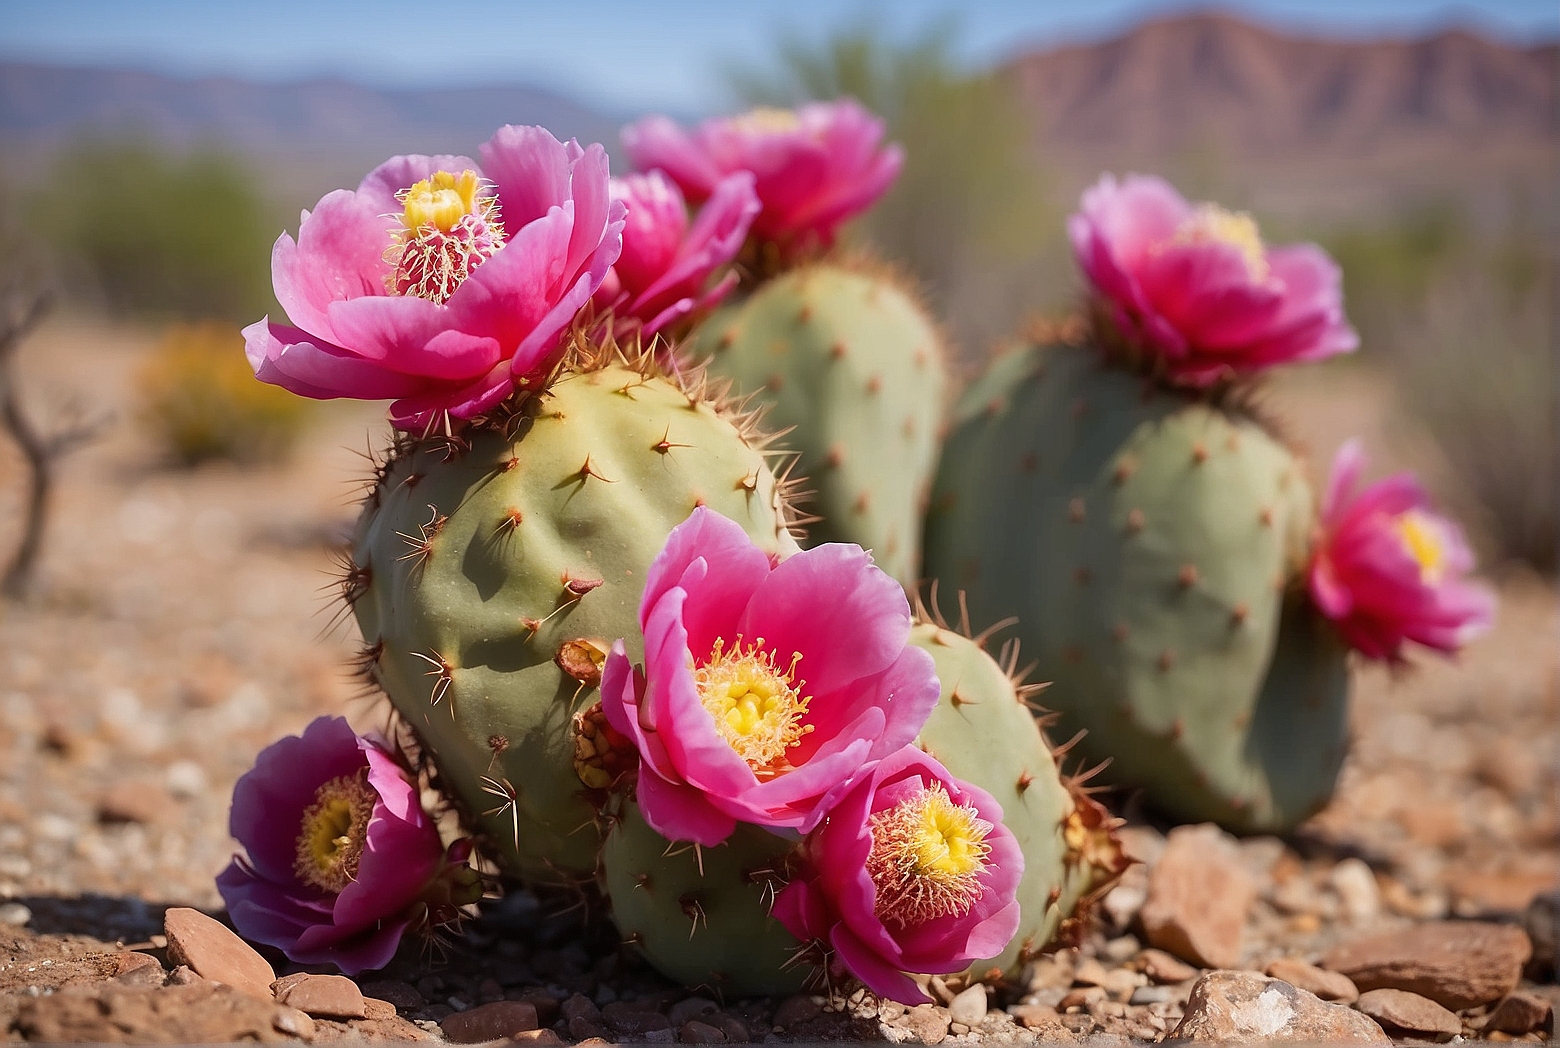 Is the Prickly Pear Cactus Edible?